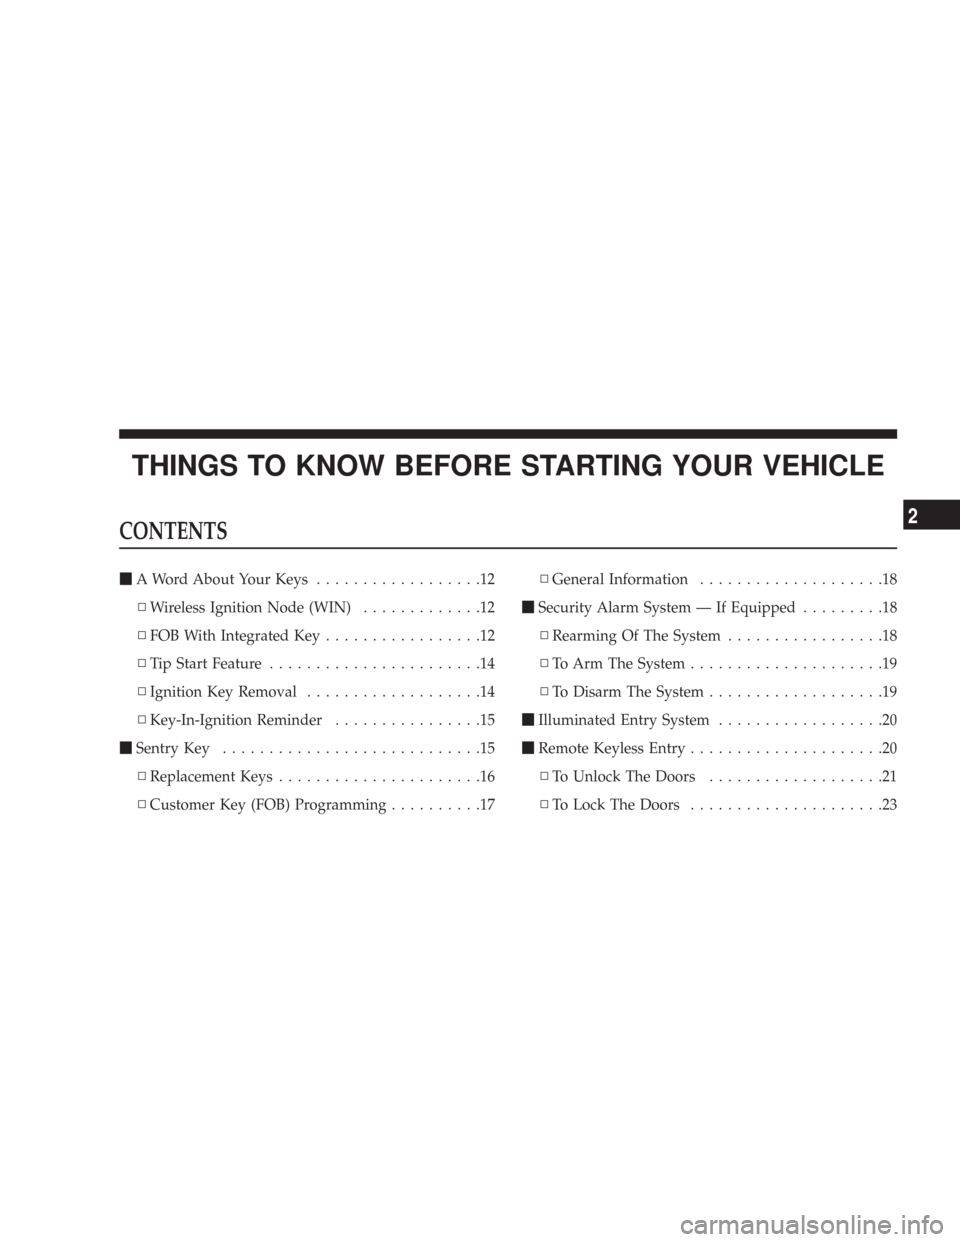 CHRYSLER 300 C 2008 1.G Owners Manual THINGS TO KNOW BEFORE STARTING YOUR VEHICLE
CONTENTS
\1A Word About Your Keys..................12
\3Wireless Ignition Node (WIN).............12
\3FOB With Integrated Key.................12
\3Tip Start